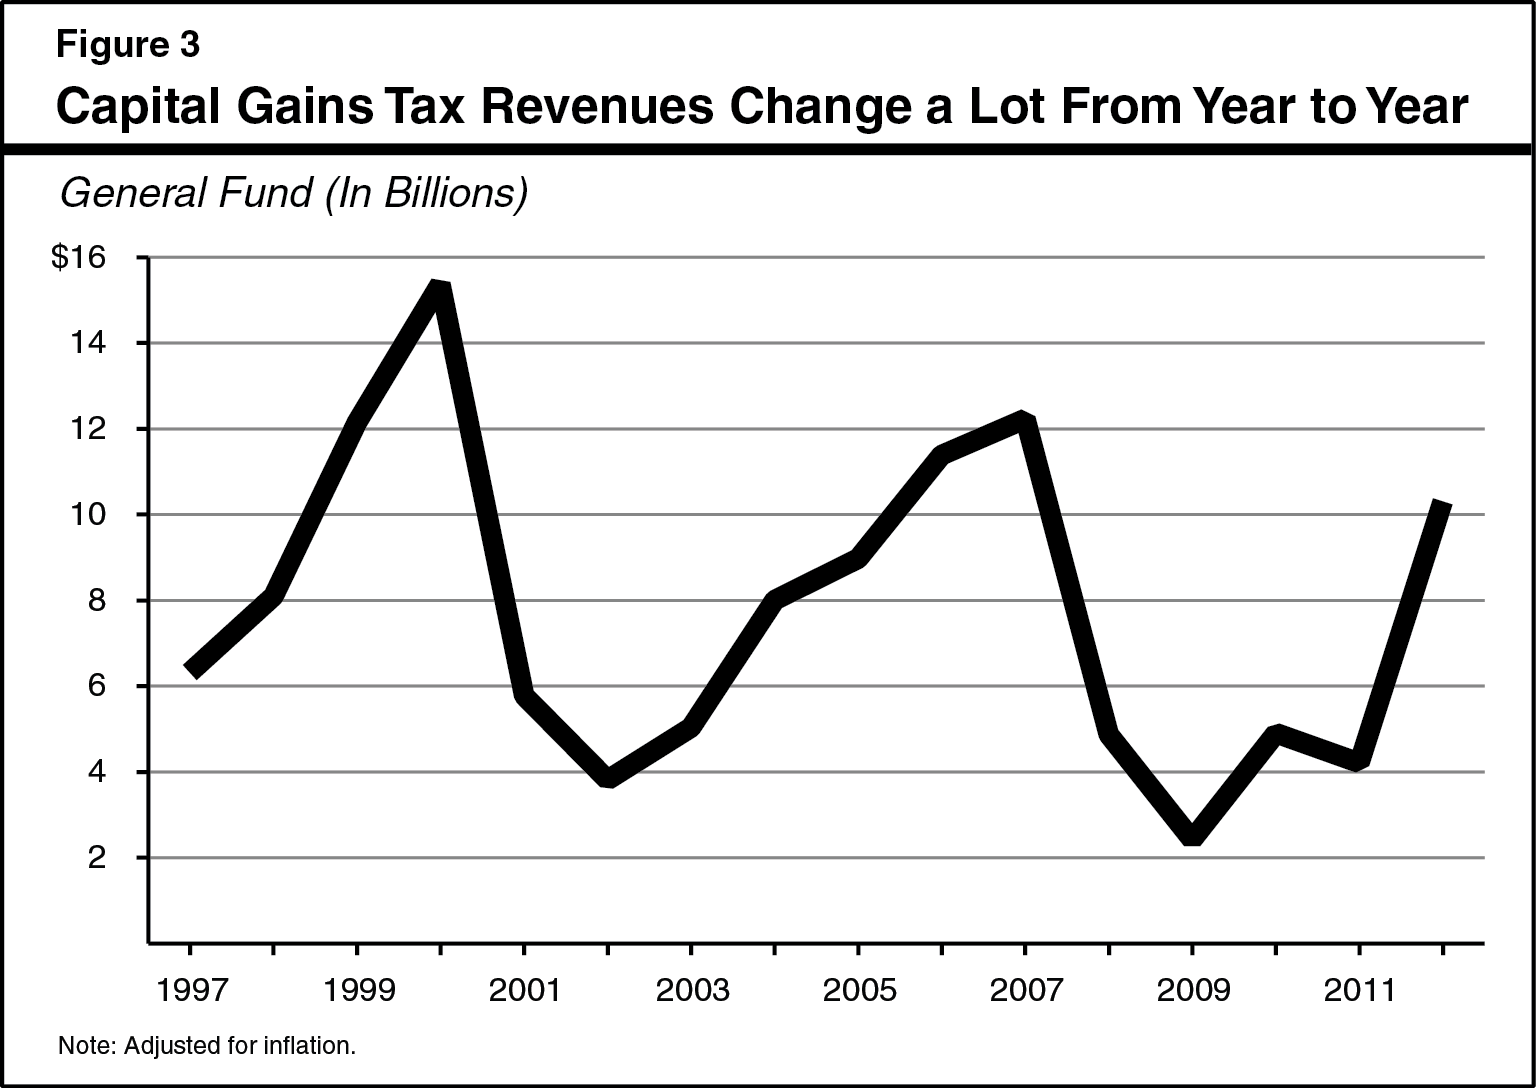 Fig 3 - Capital Gains Tax Revenues Change a Lot From Year to Year